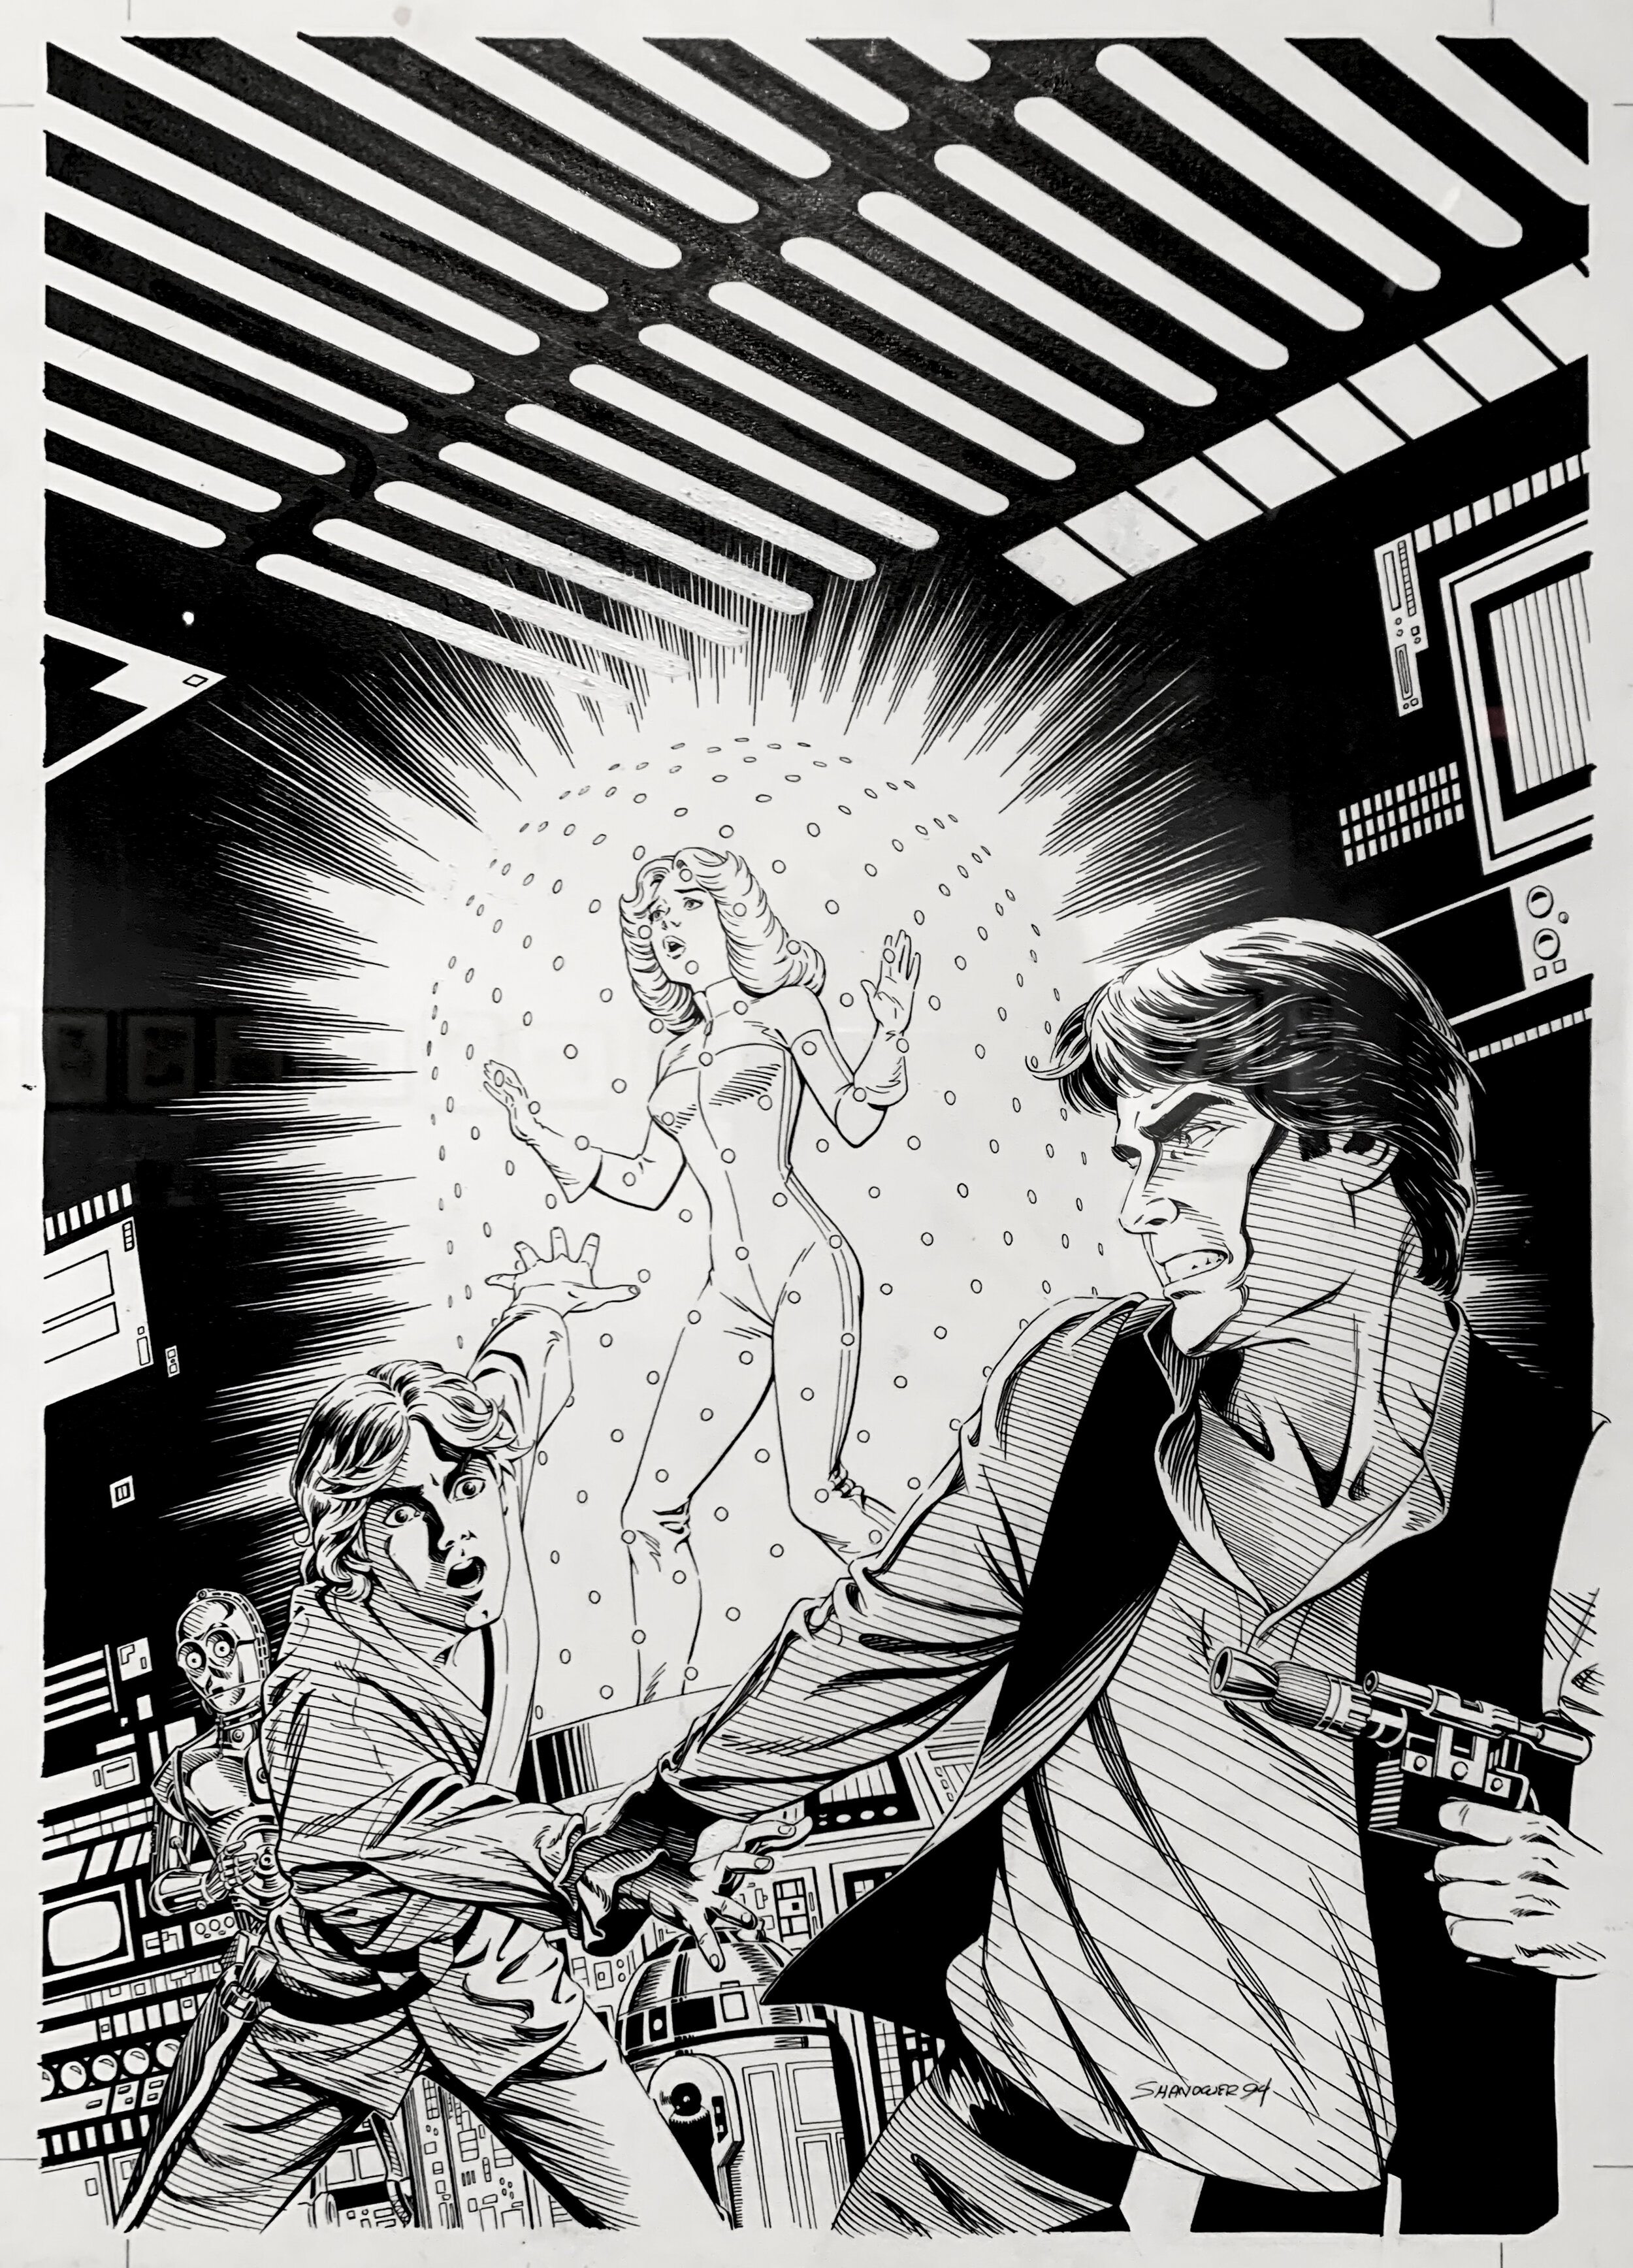   Eric Shanower    CLASSIC STAR WARS EARLY ADVENTURES #6,   published by Dark Horse Comics, Jan. 1995. cover.,  1995  pen and india ink on Bristol board 